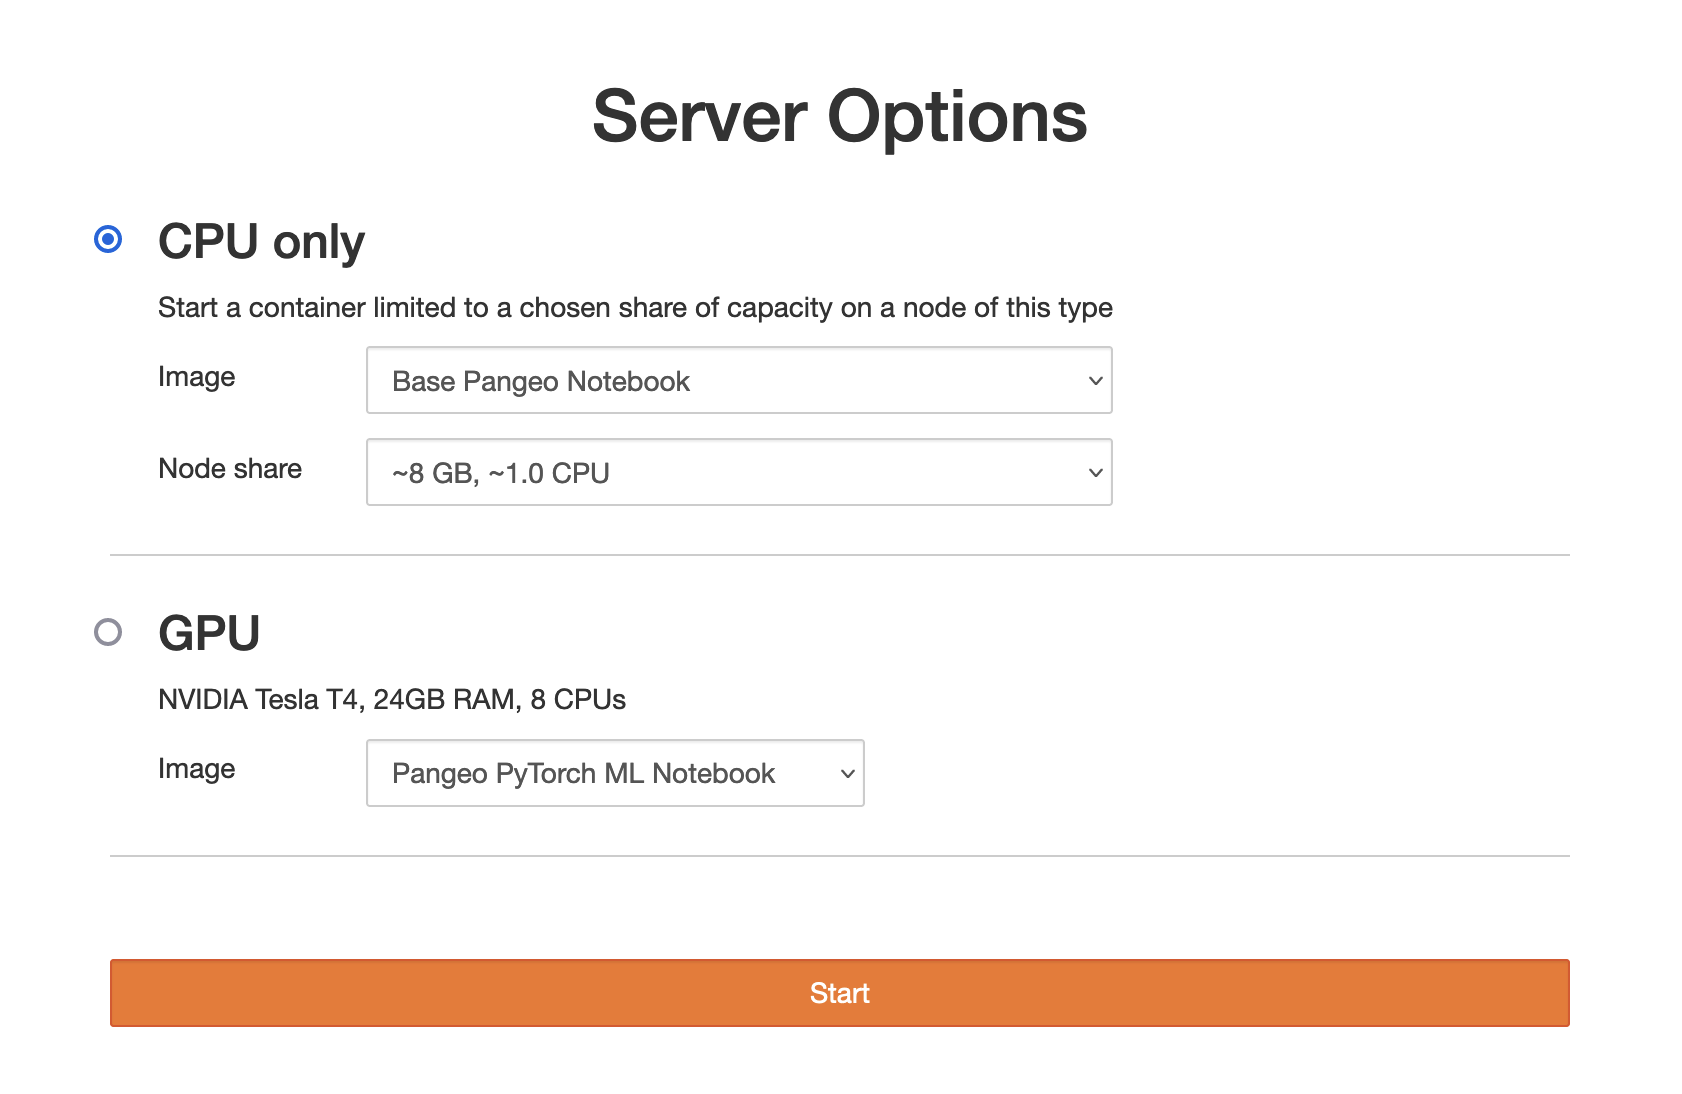 Server Options page example